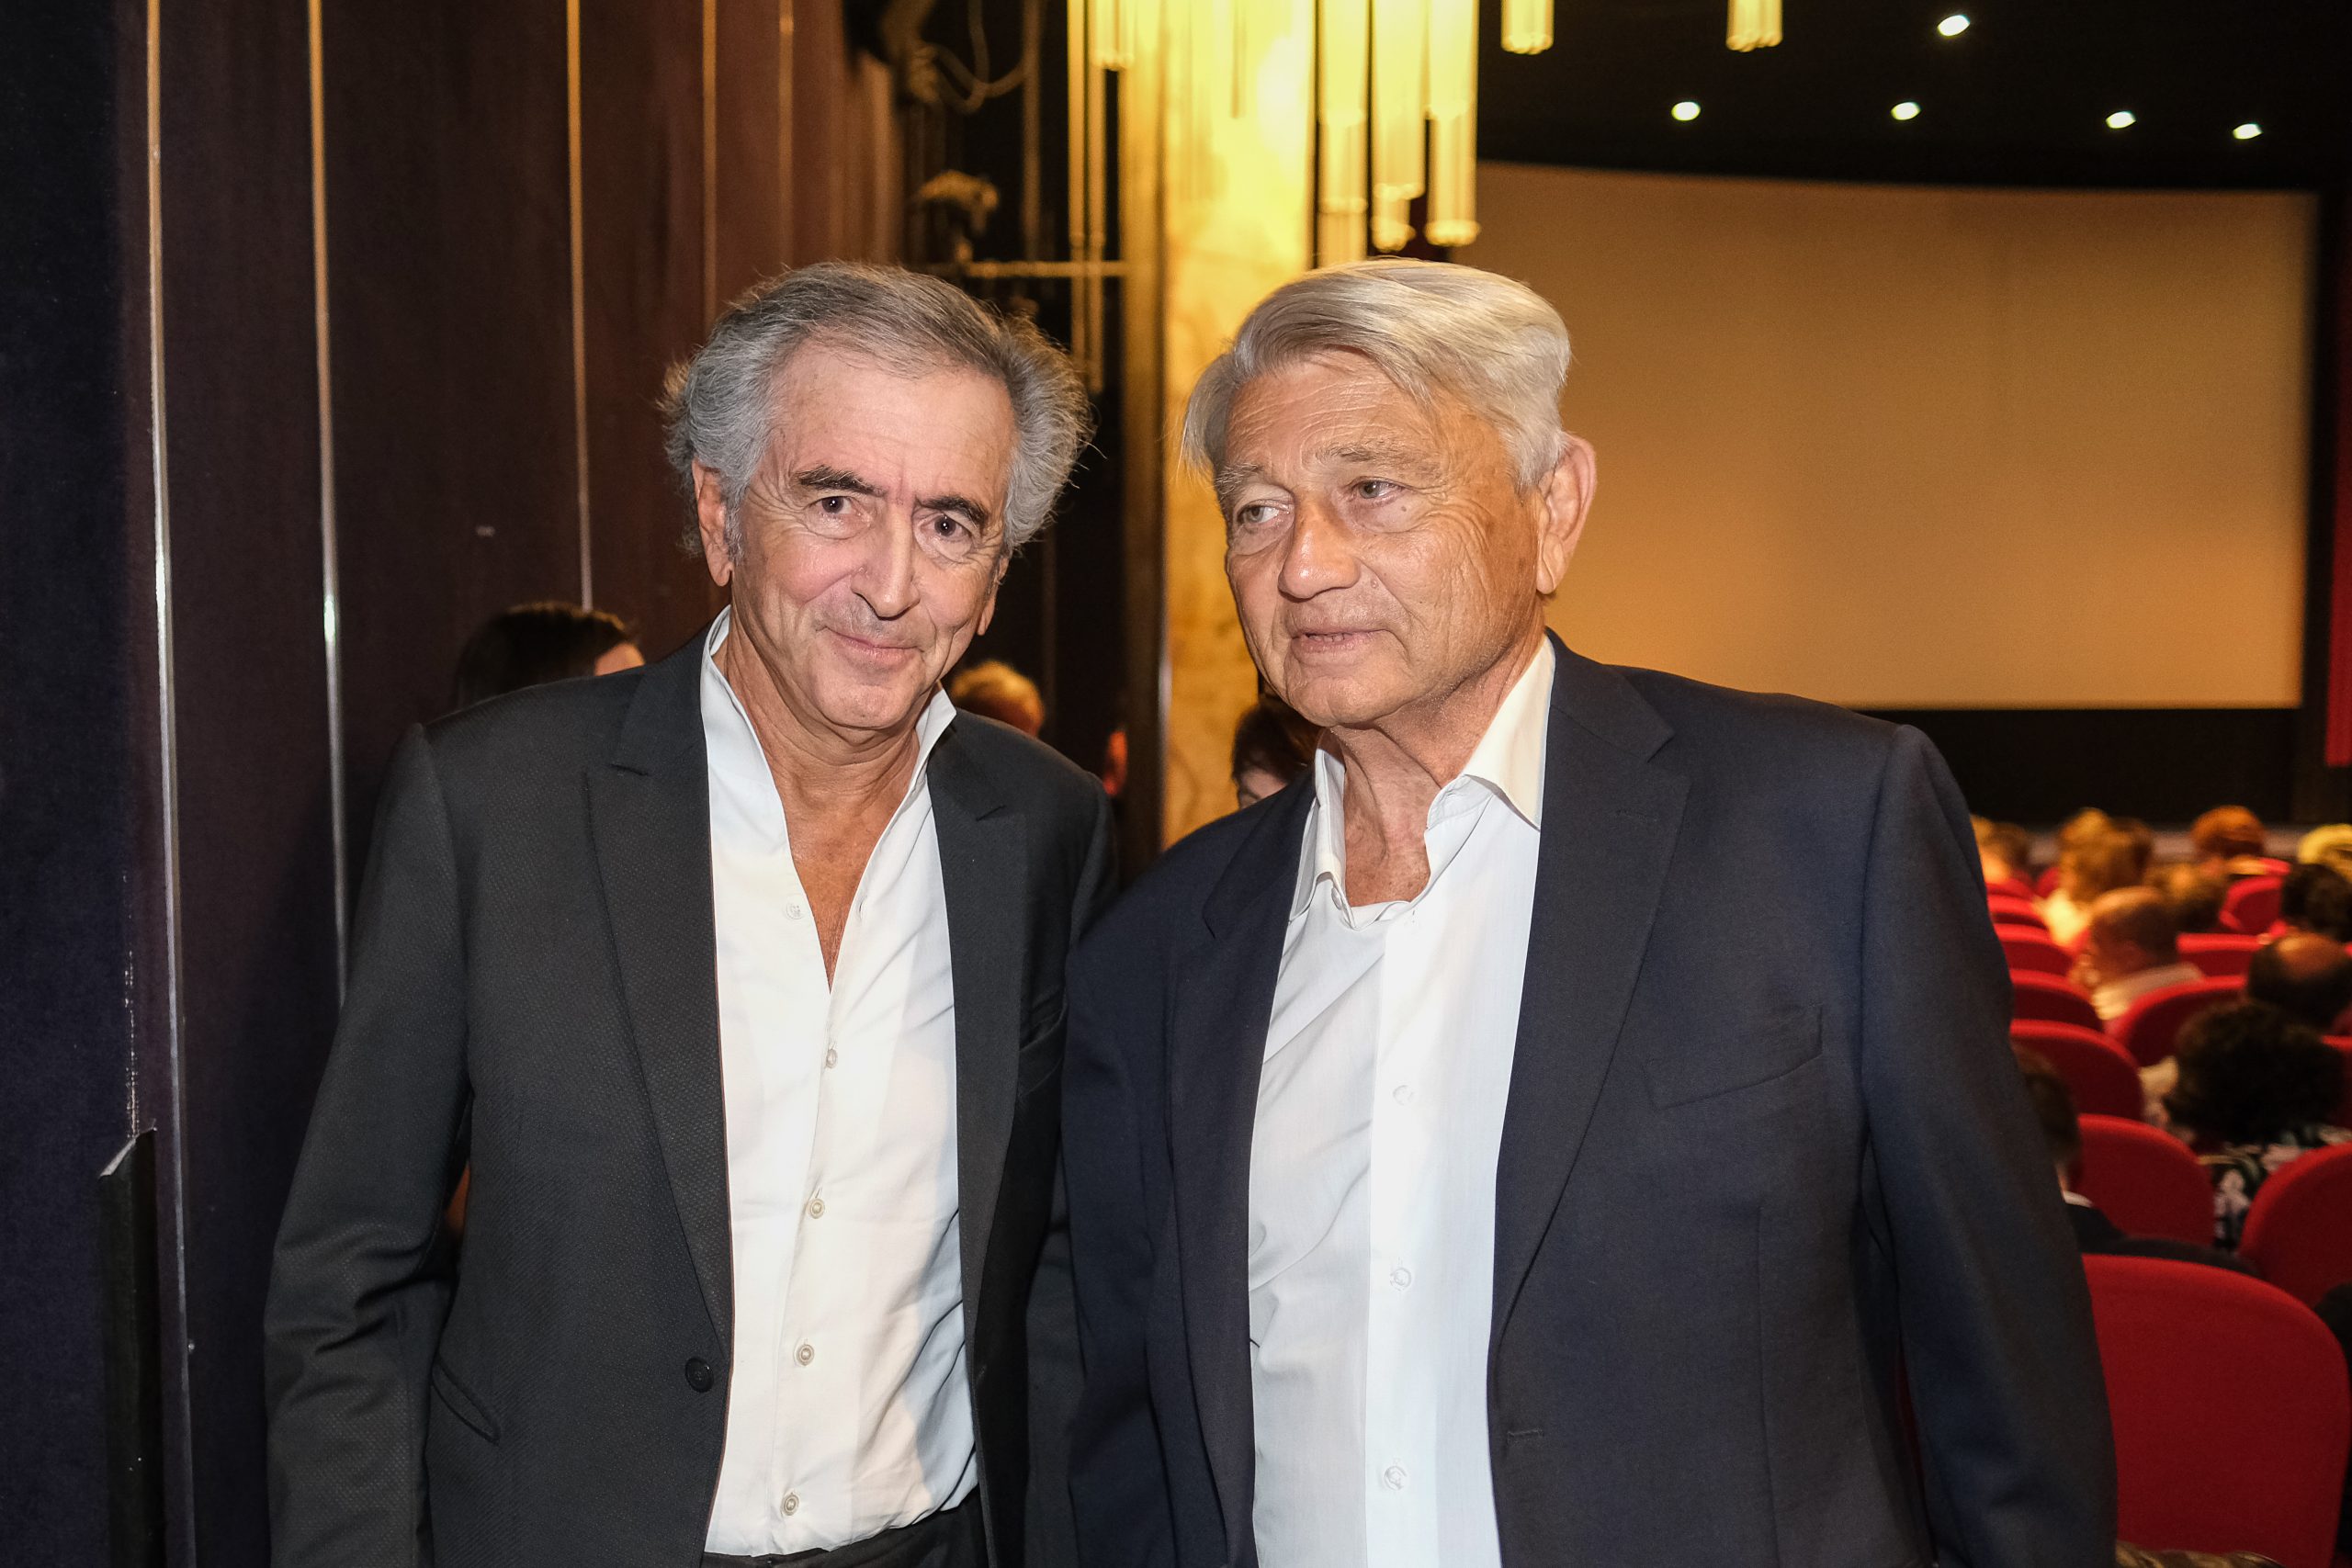 Bernard-Henri Lévy and Alain Madelin at the preview of BHL's film "Why Ukraine", at the Cinema Le Balzac in Paris.